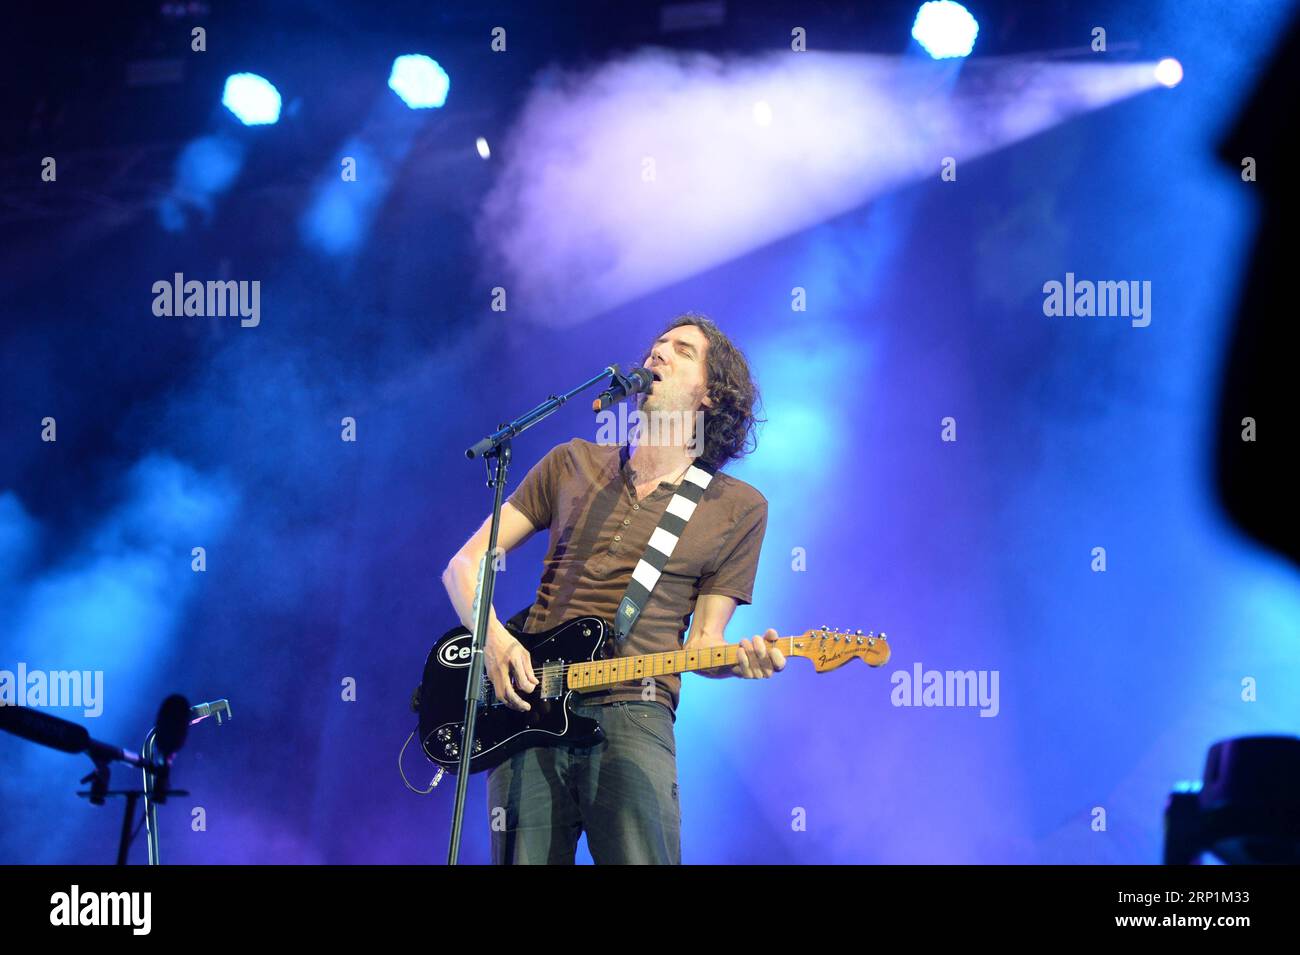 Pearl Jam at Palco NOS on July 13